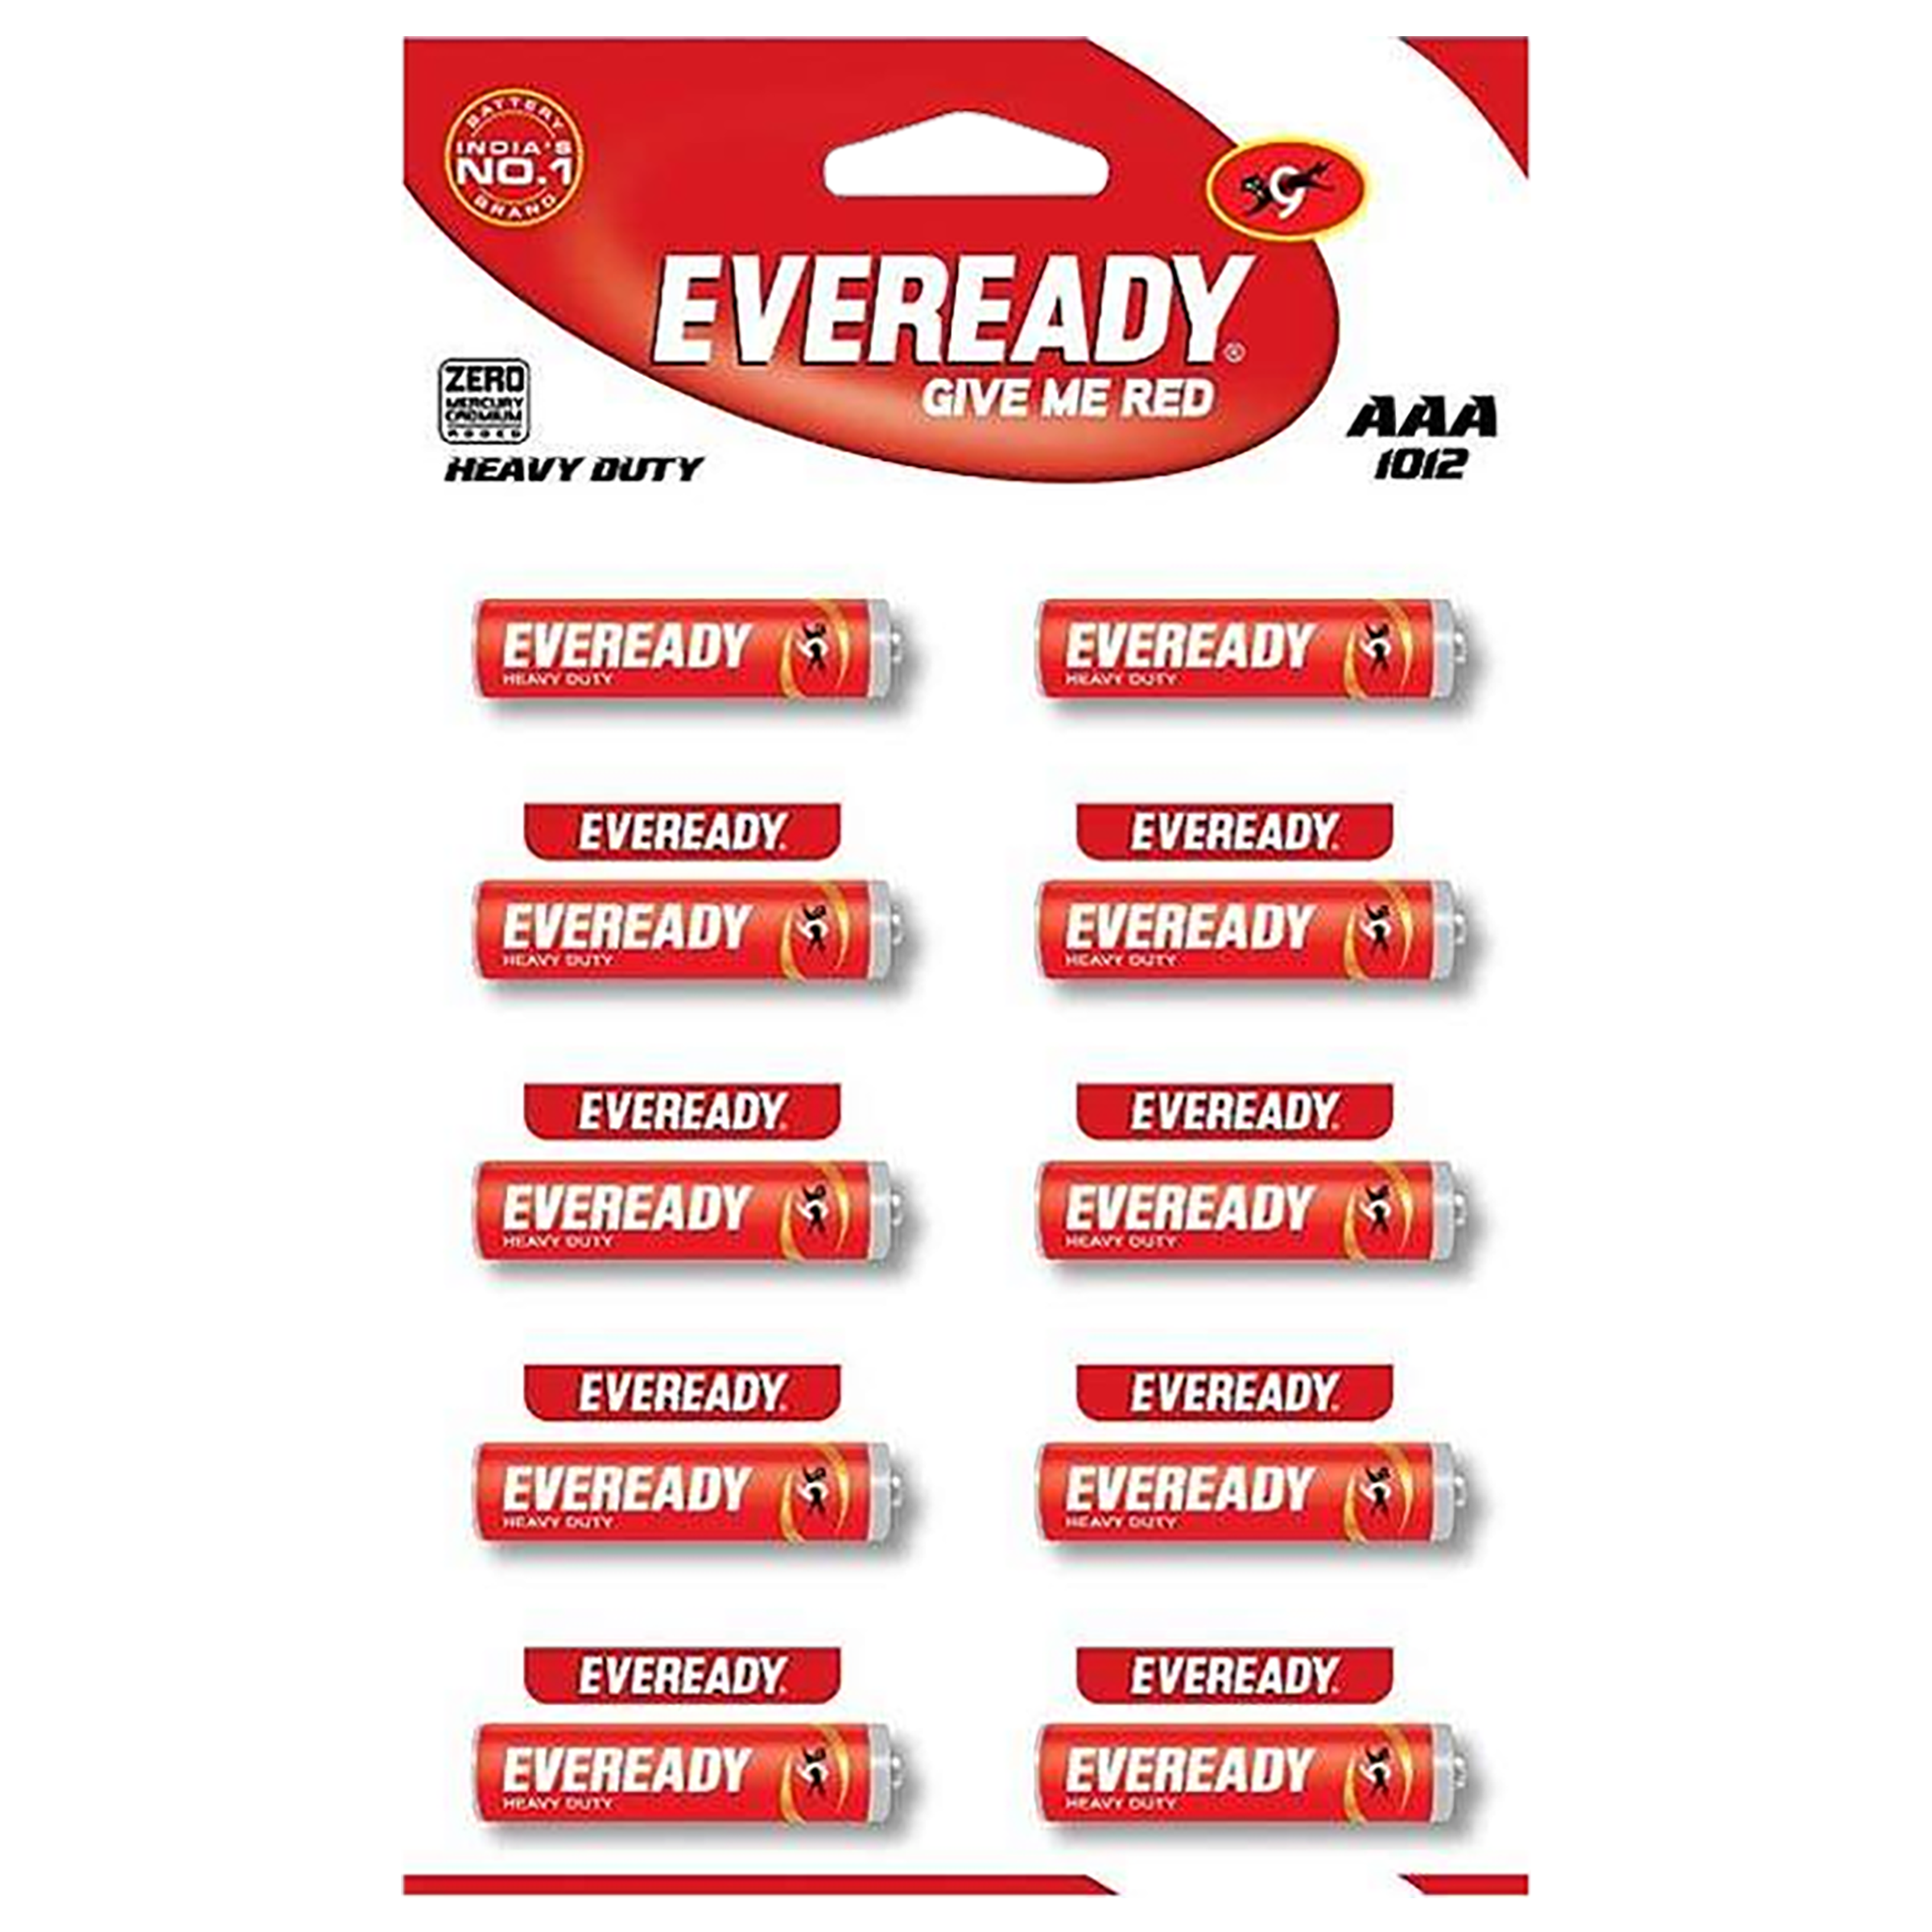 EVEREADY 1012 Carbon Zinc AAA Battery (Pack of 10)